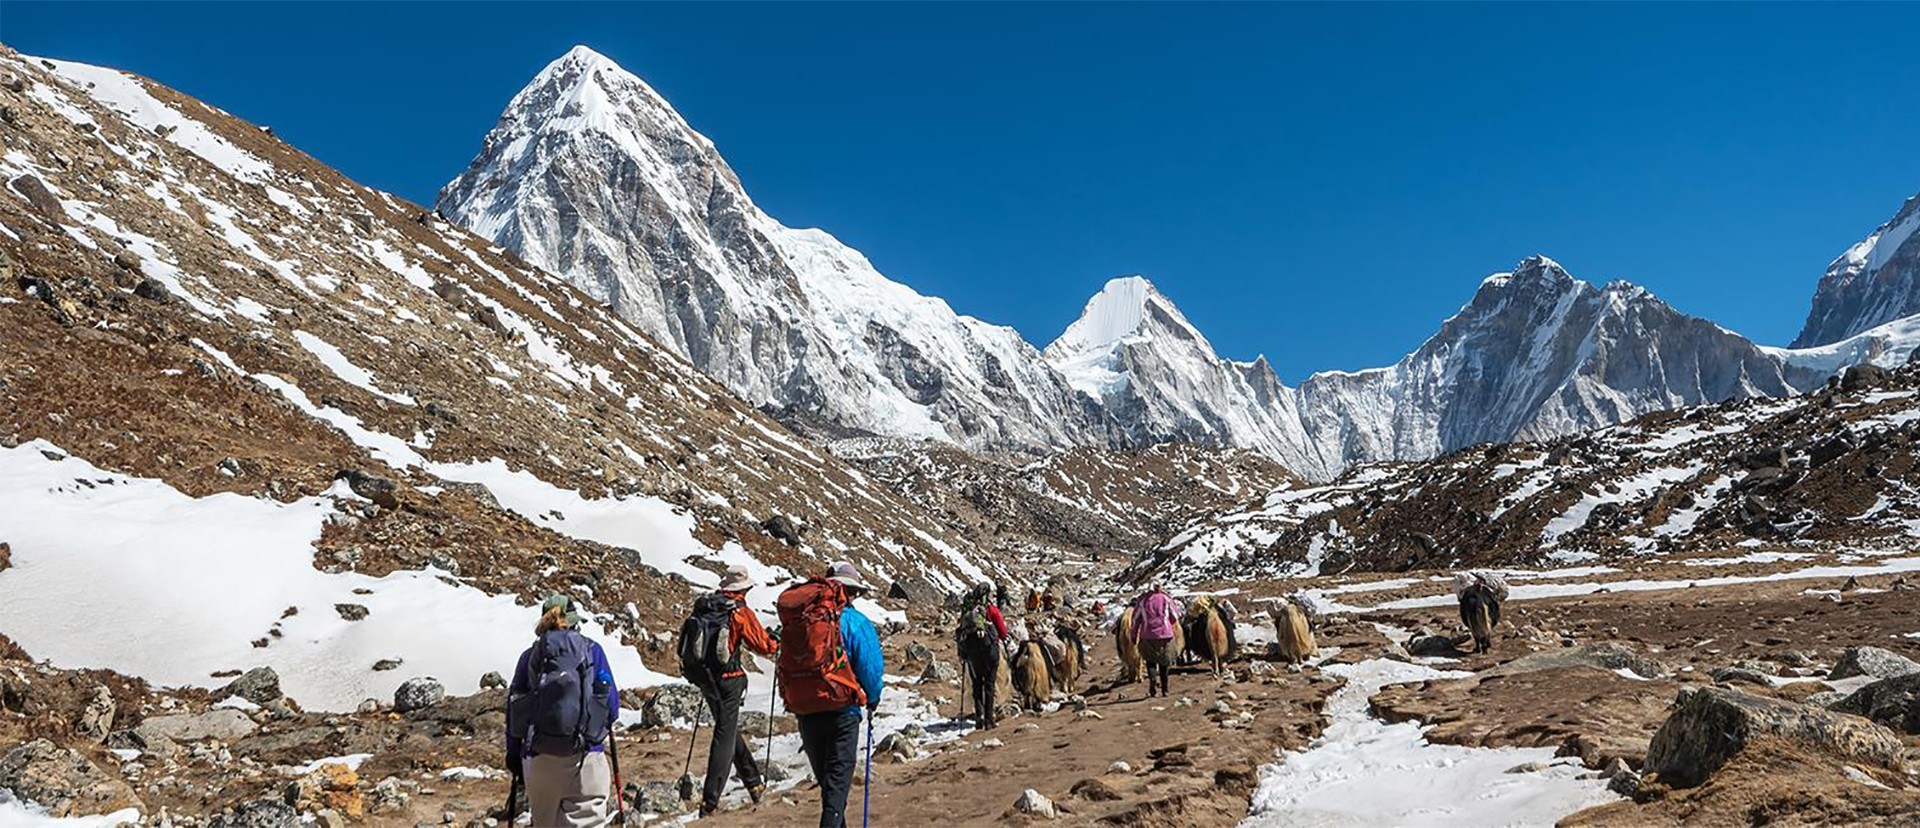 Luxury Everest Base Camp Trek by Helicopter from Base Camp to Lukla